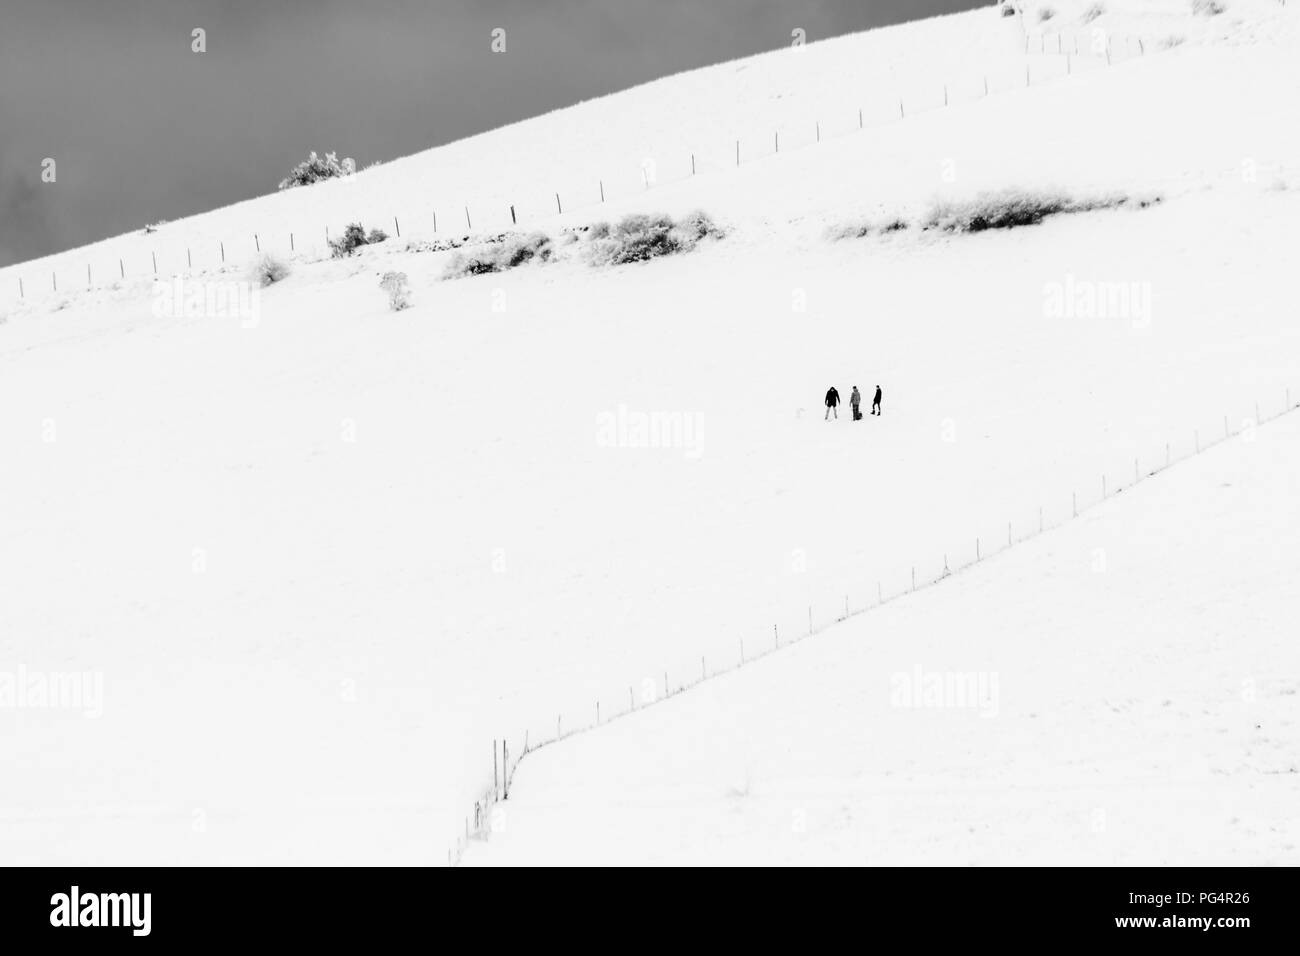 Some people in the middle of snow on a mountain, near some fences Stock Photo